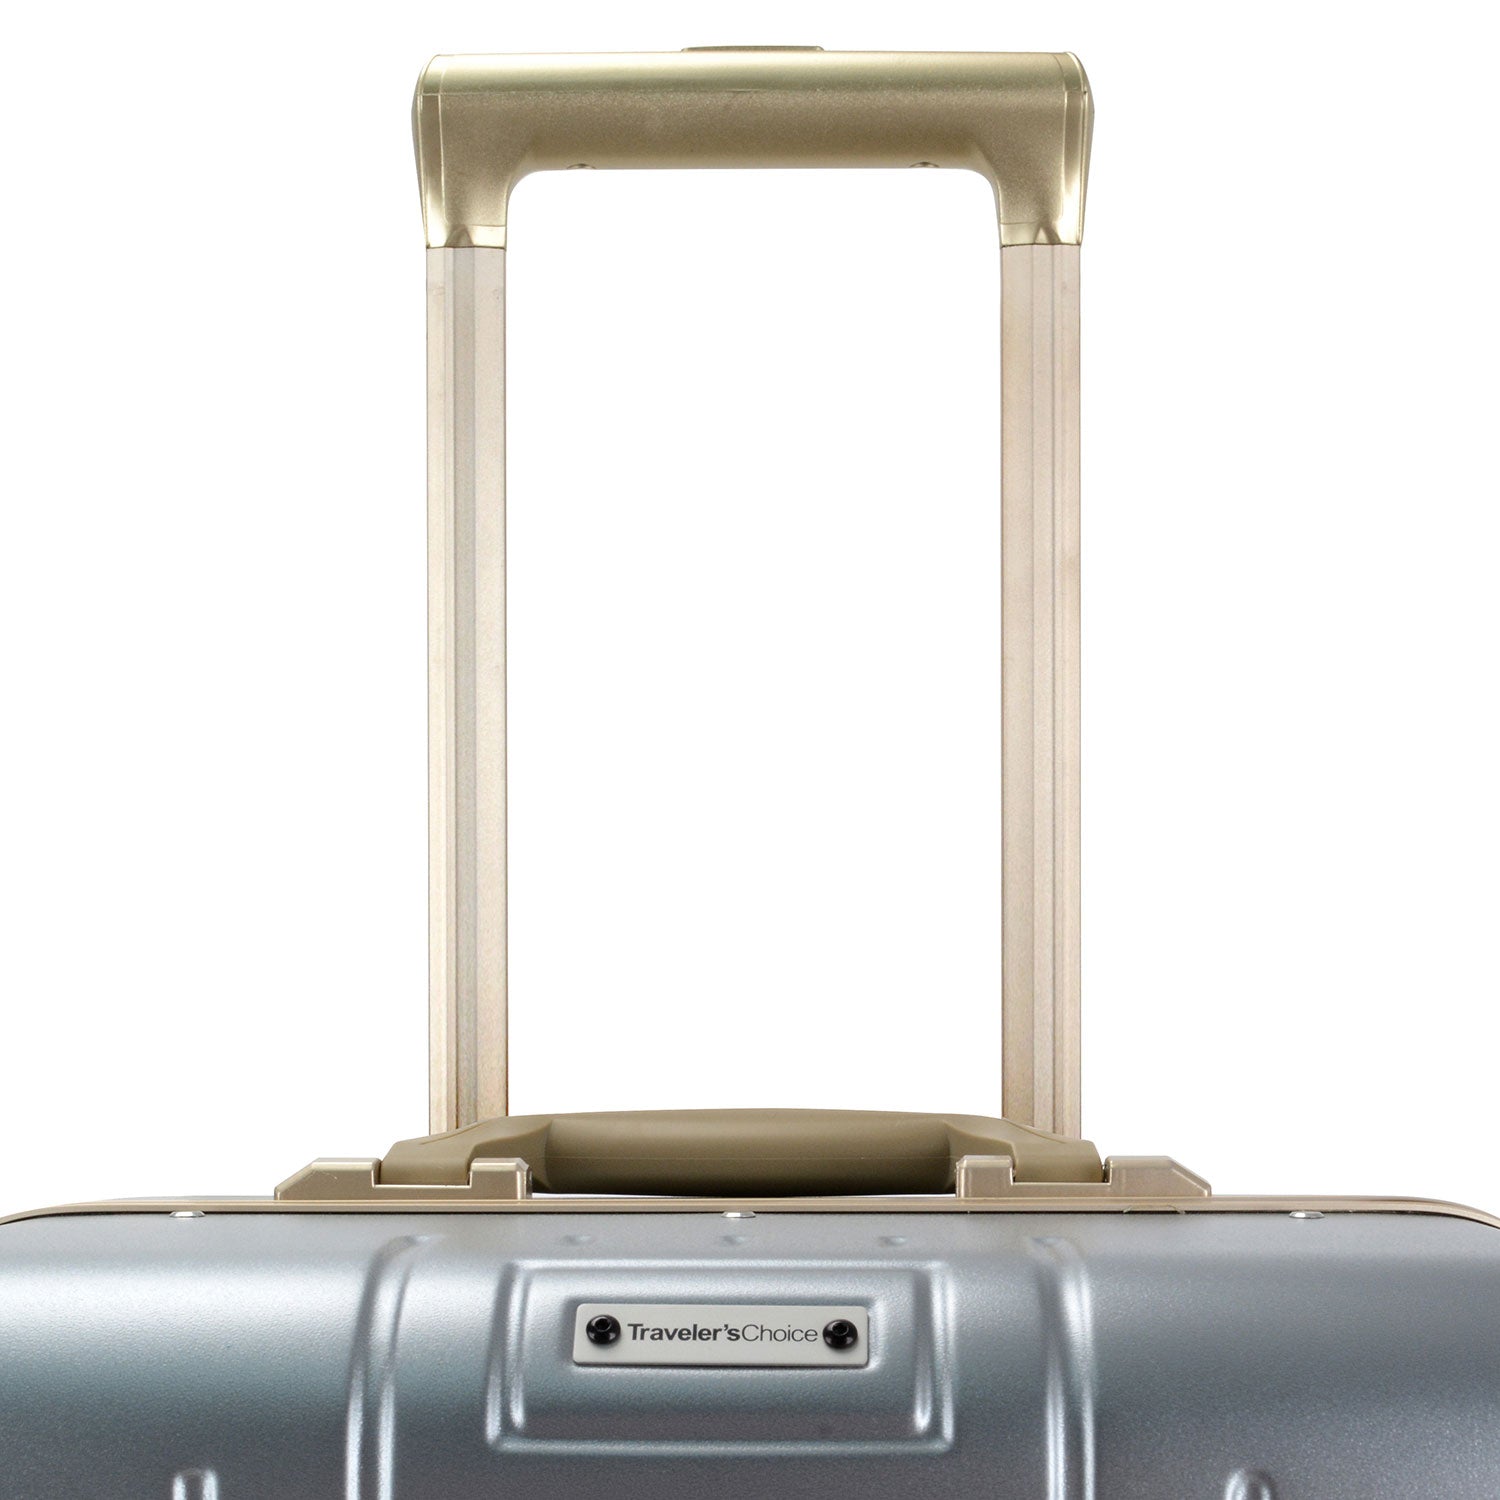 Monaghan Carry-on Spinner Suitcase